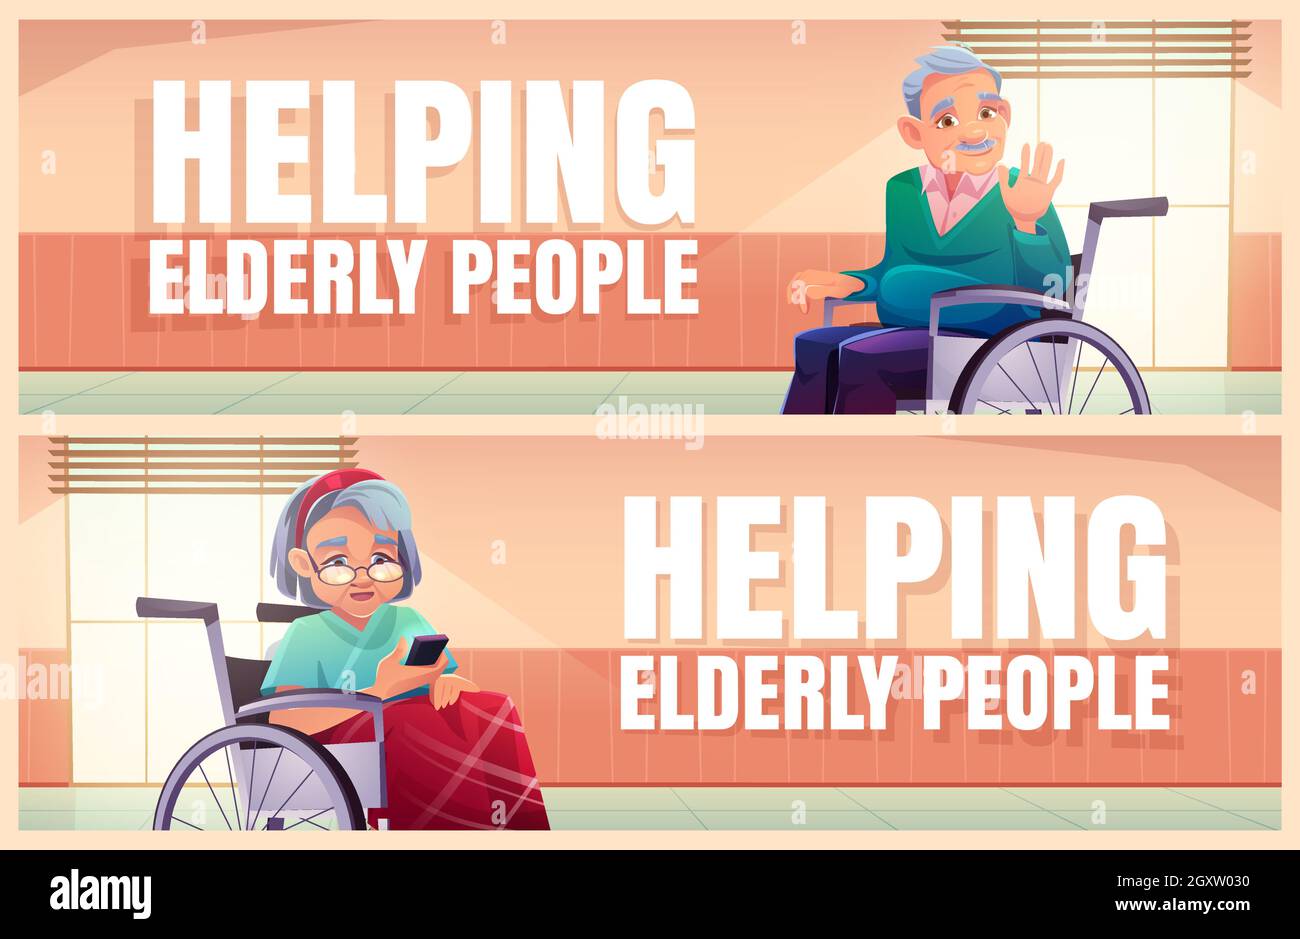 Helping elderly people cartoon banners, senior disabled man and woman on wheelchair in nursing home or hospital hallway. Old lady with mobile, grey haired pensioner waving hand, vector illustration Stock Vector